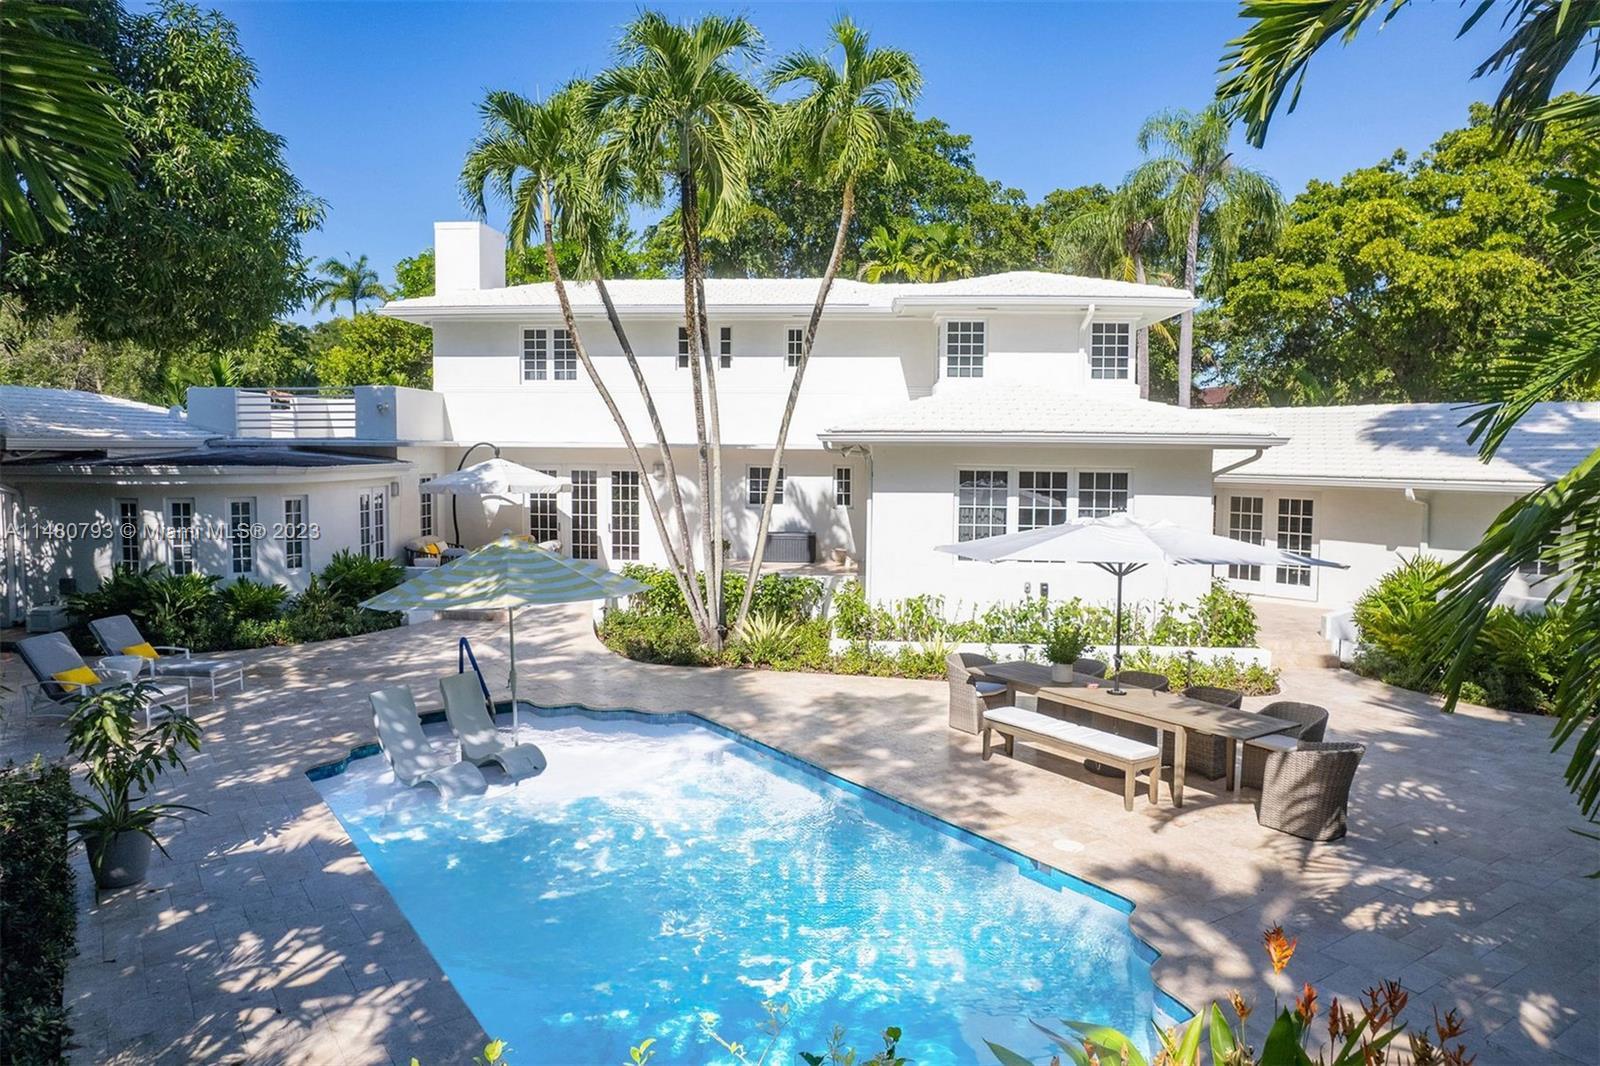 Classic Coral Gables Historic Landmark. This meticulously maintained home with many of its original 